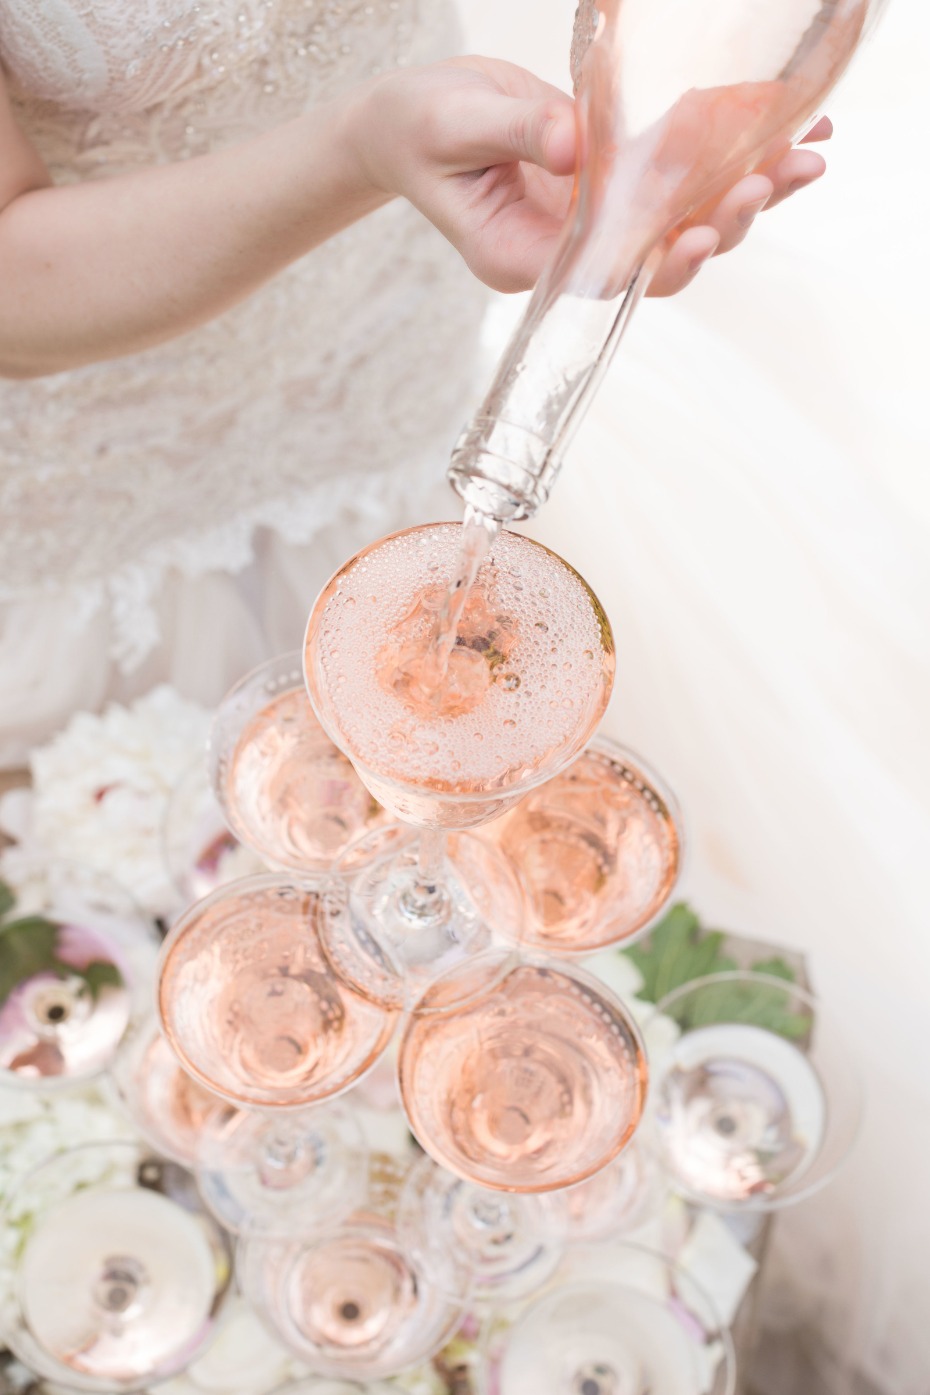 RosÃ© champagne tower